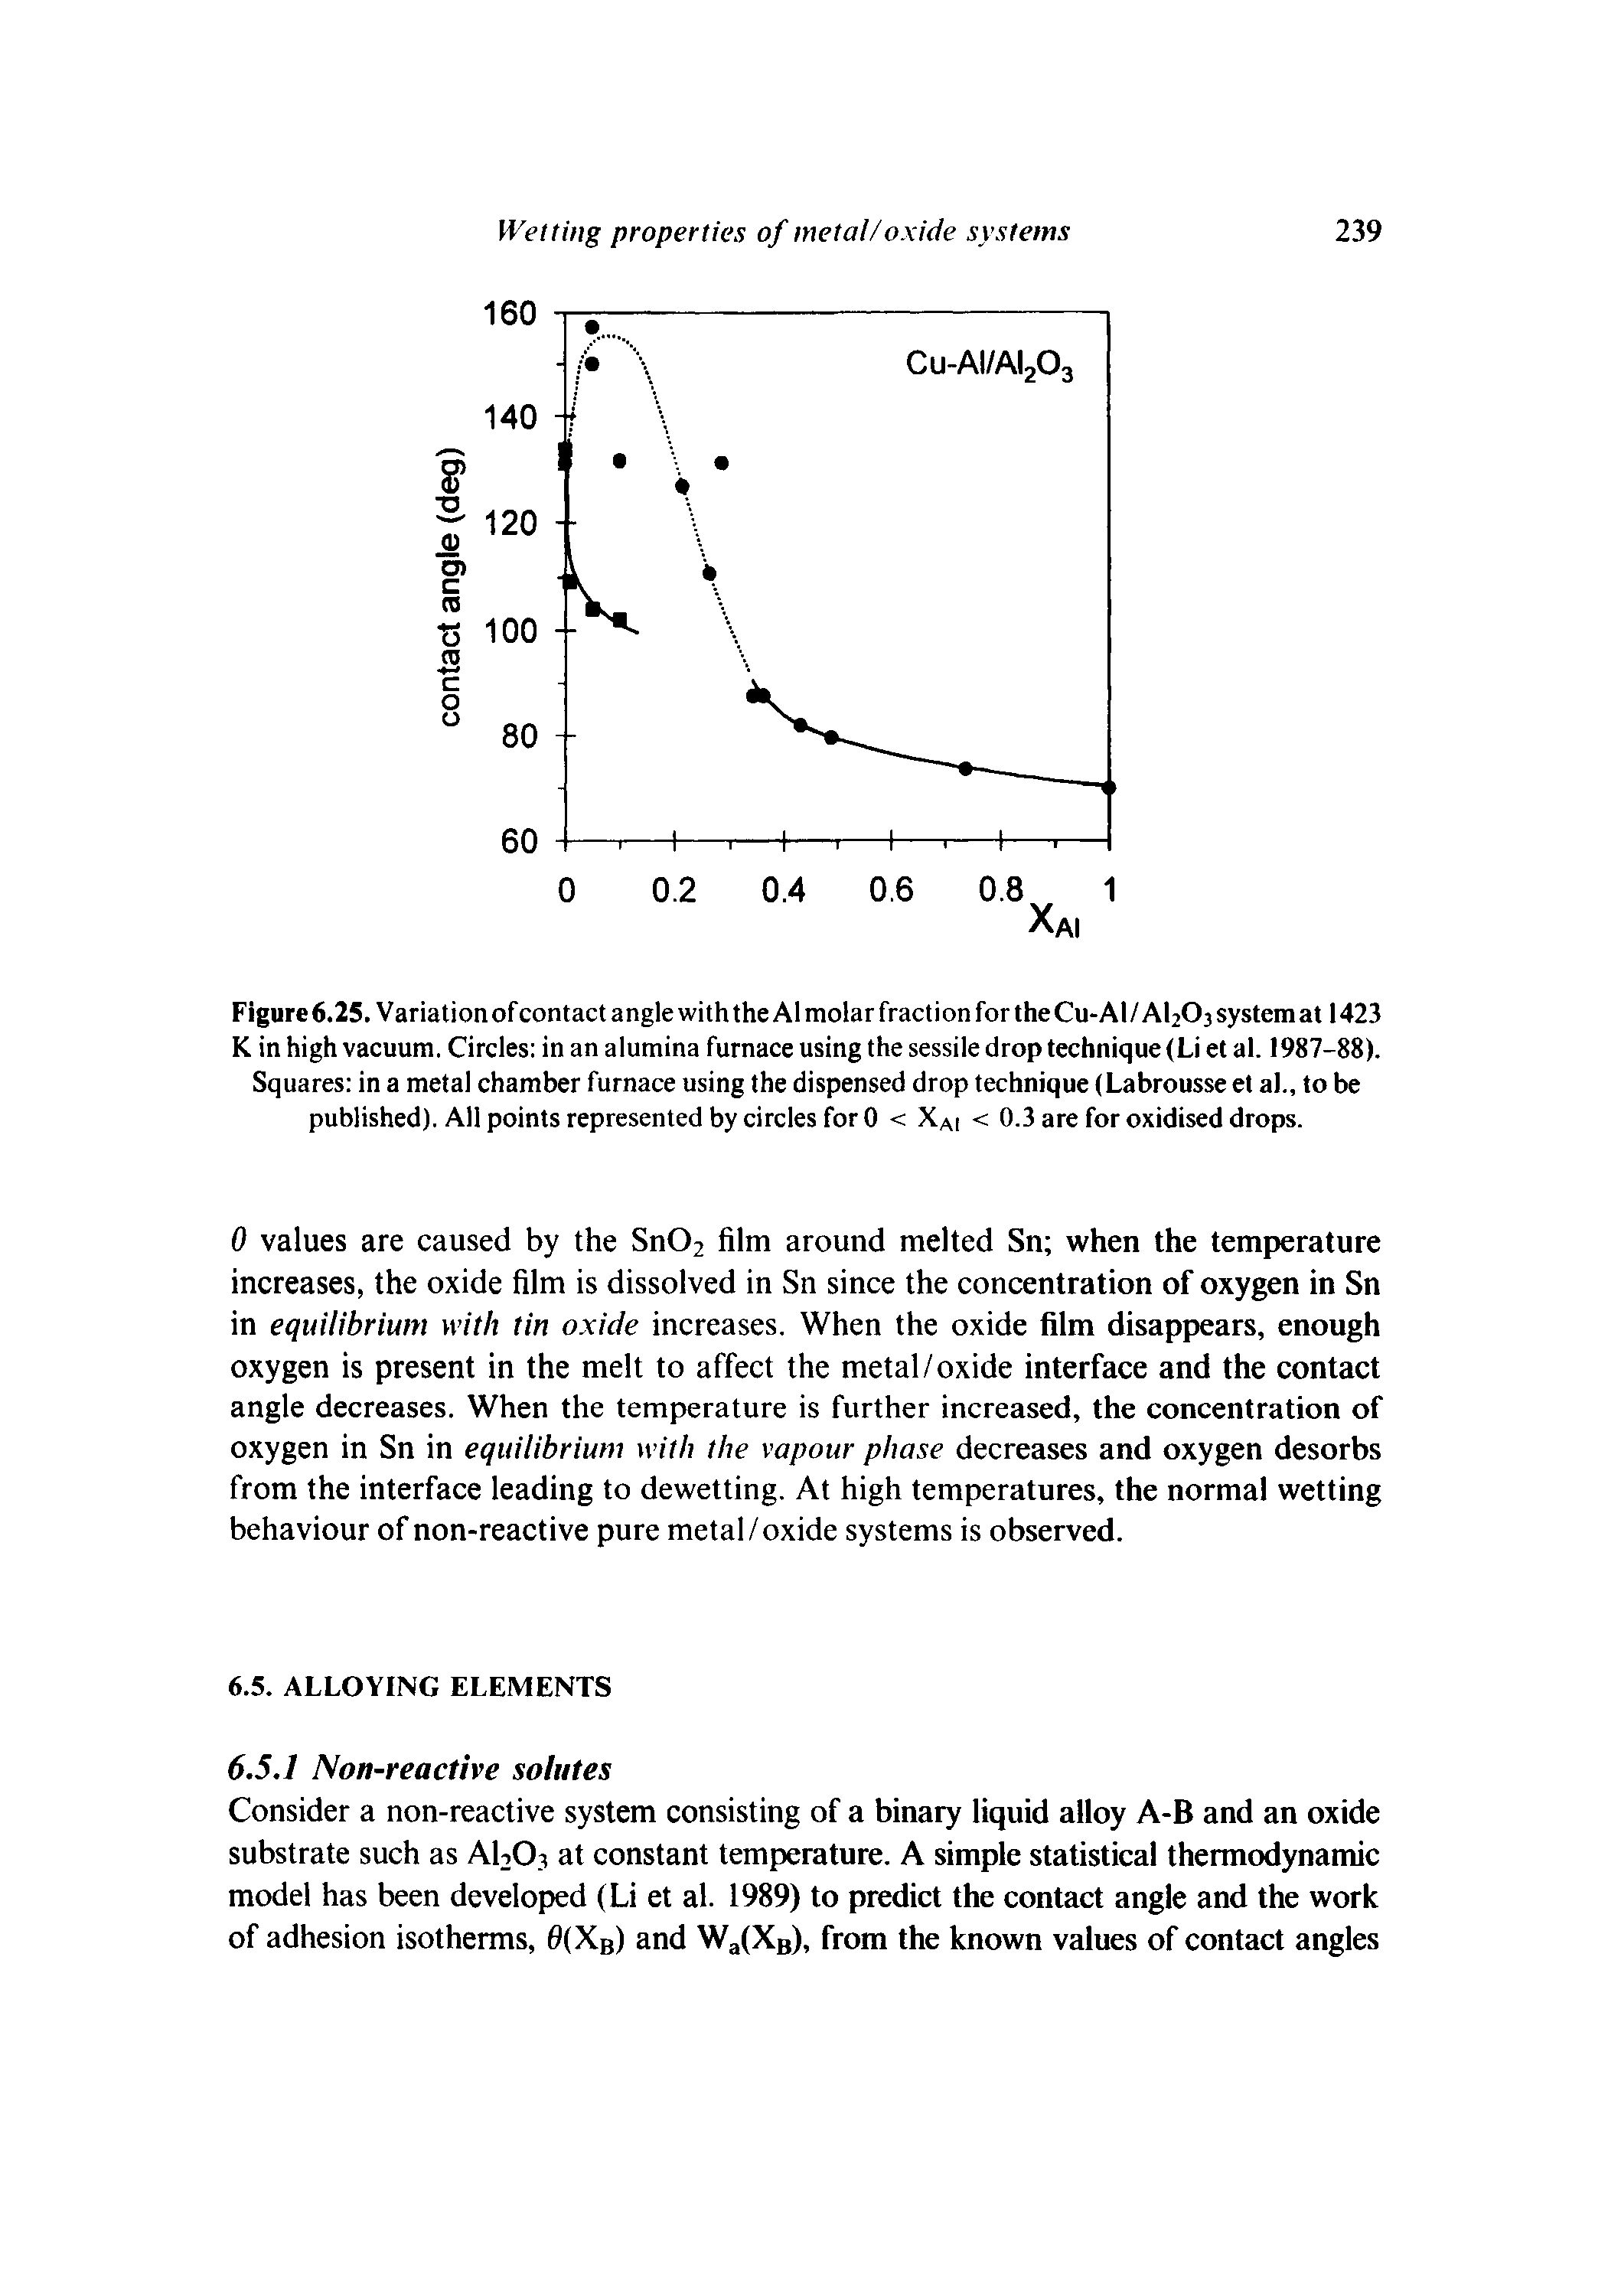 Figure 6.25. Variation of contact angle with the A1 molar fraction for the Cu-AI/AI2O3 system at 1423 K in high vacuum. Circles in an alumina furnace using the sessile drop technique (Li et al. 1987-88). Squares in a metal chamber furnace using the dispensed drop technique (Labrousse et al., to be published). All points represented by circles for 0 < XAi < 0.3 are for oxidised drops.